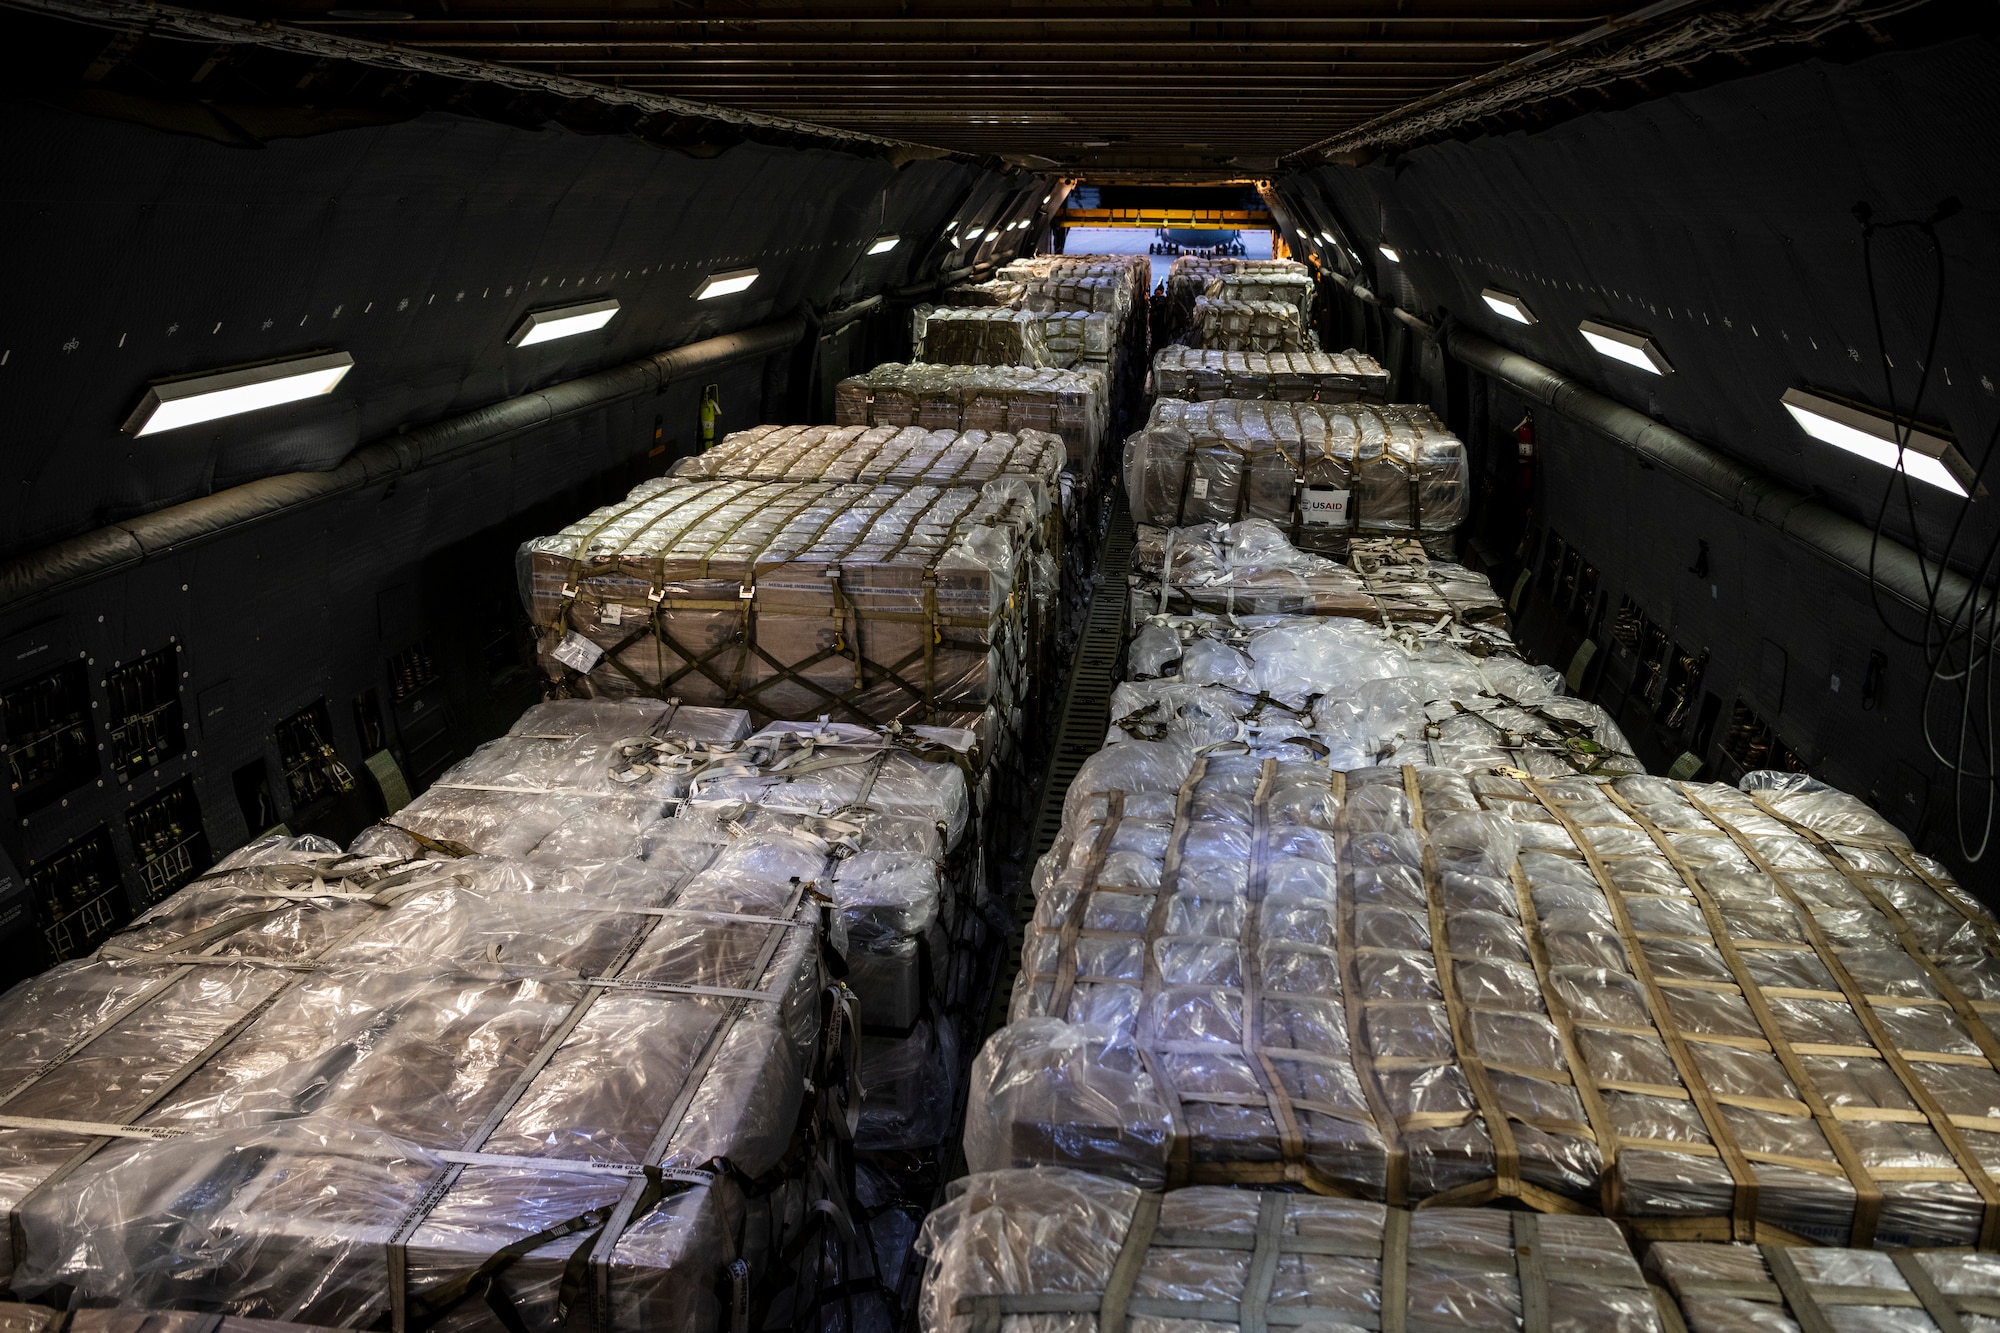 The inside view of an extremely large military aircraft full of pallets.